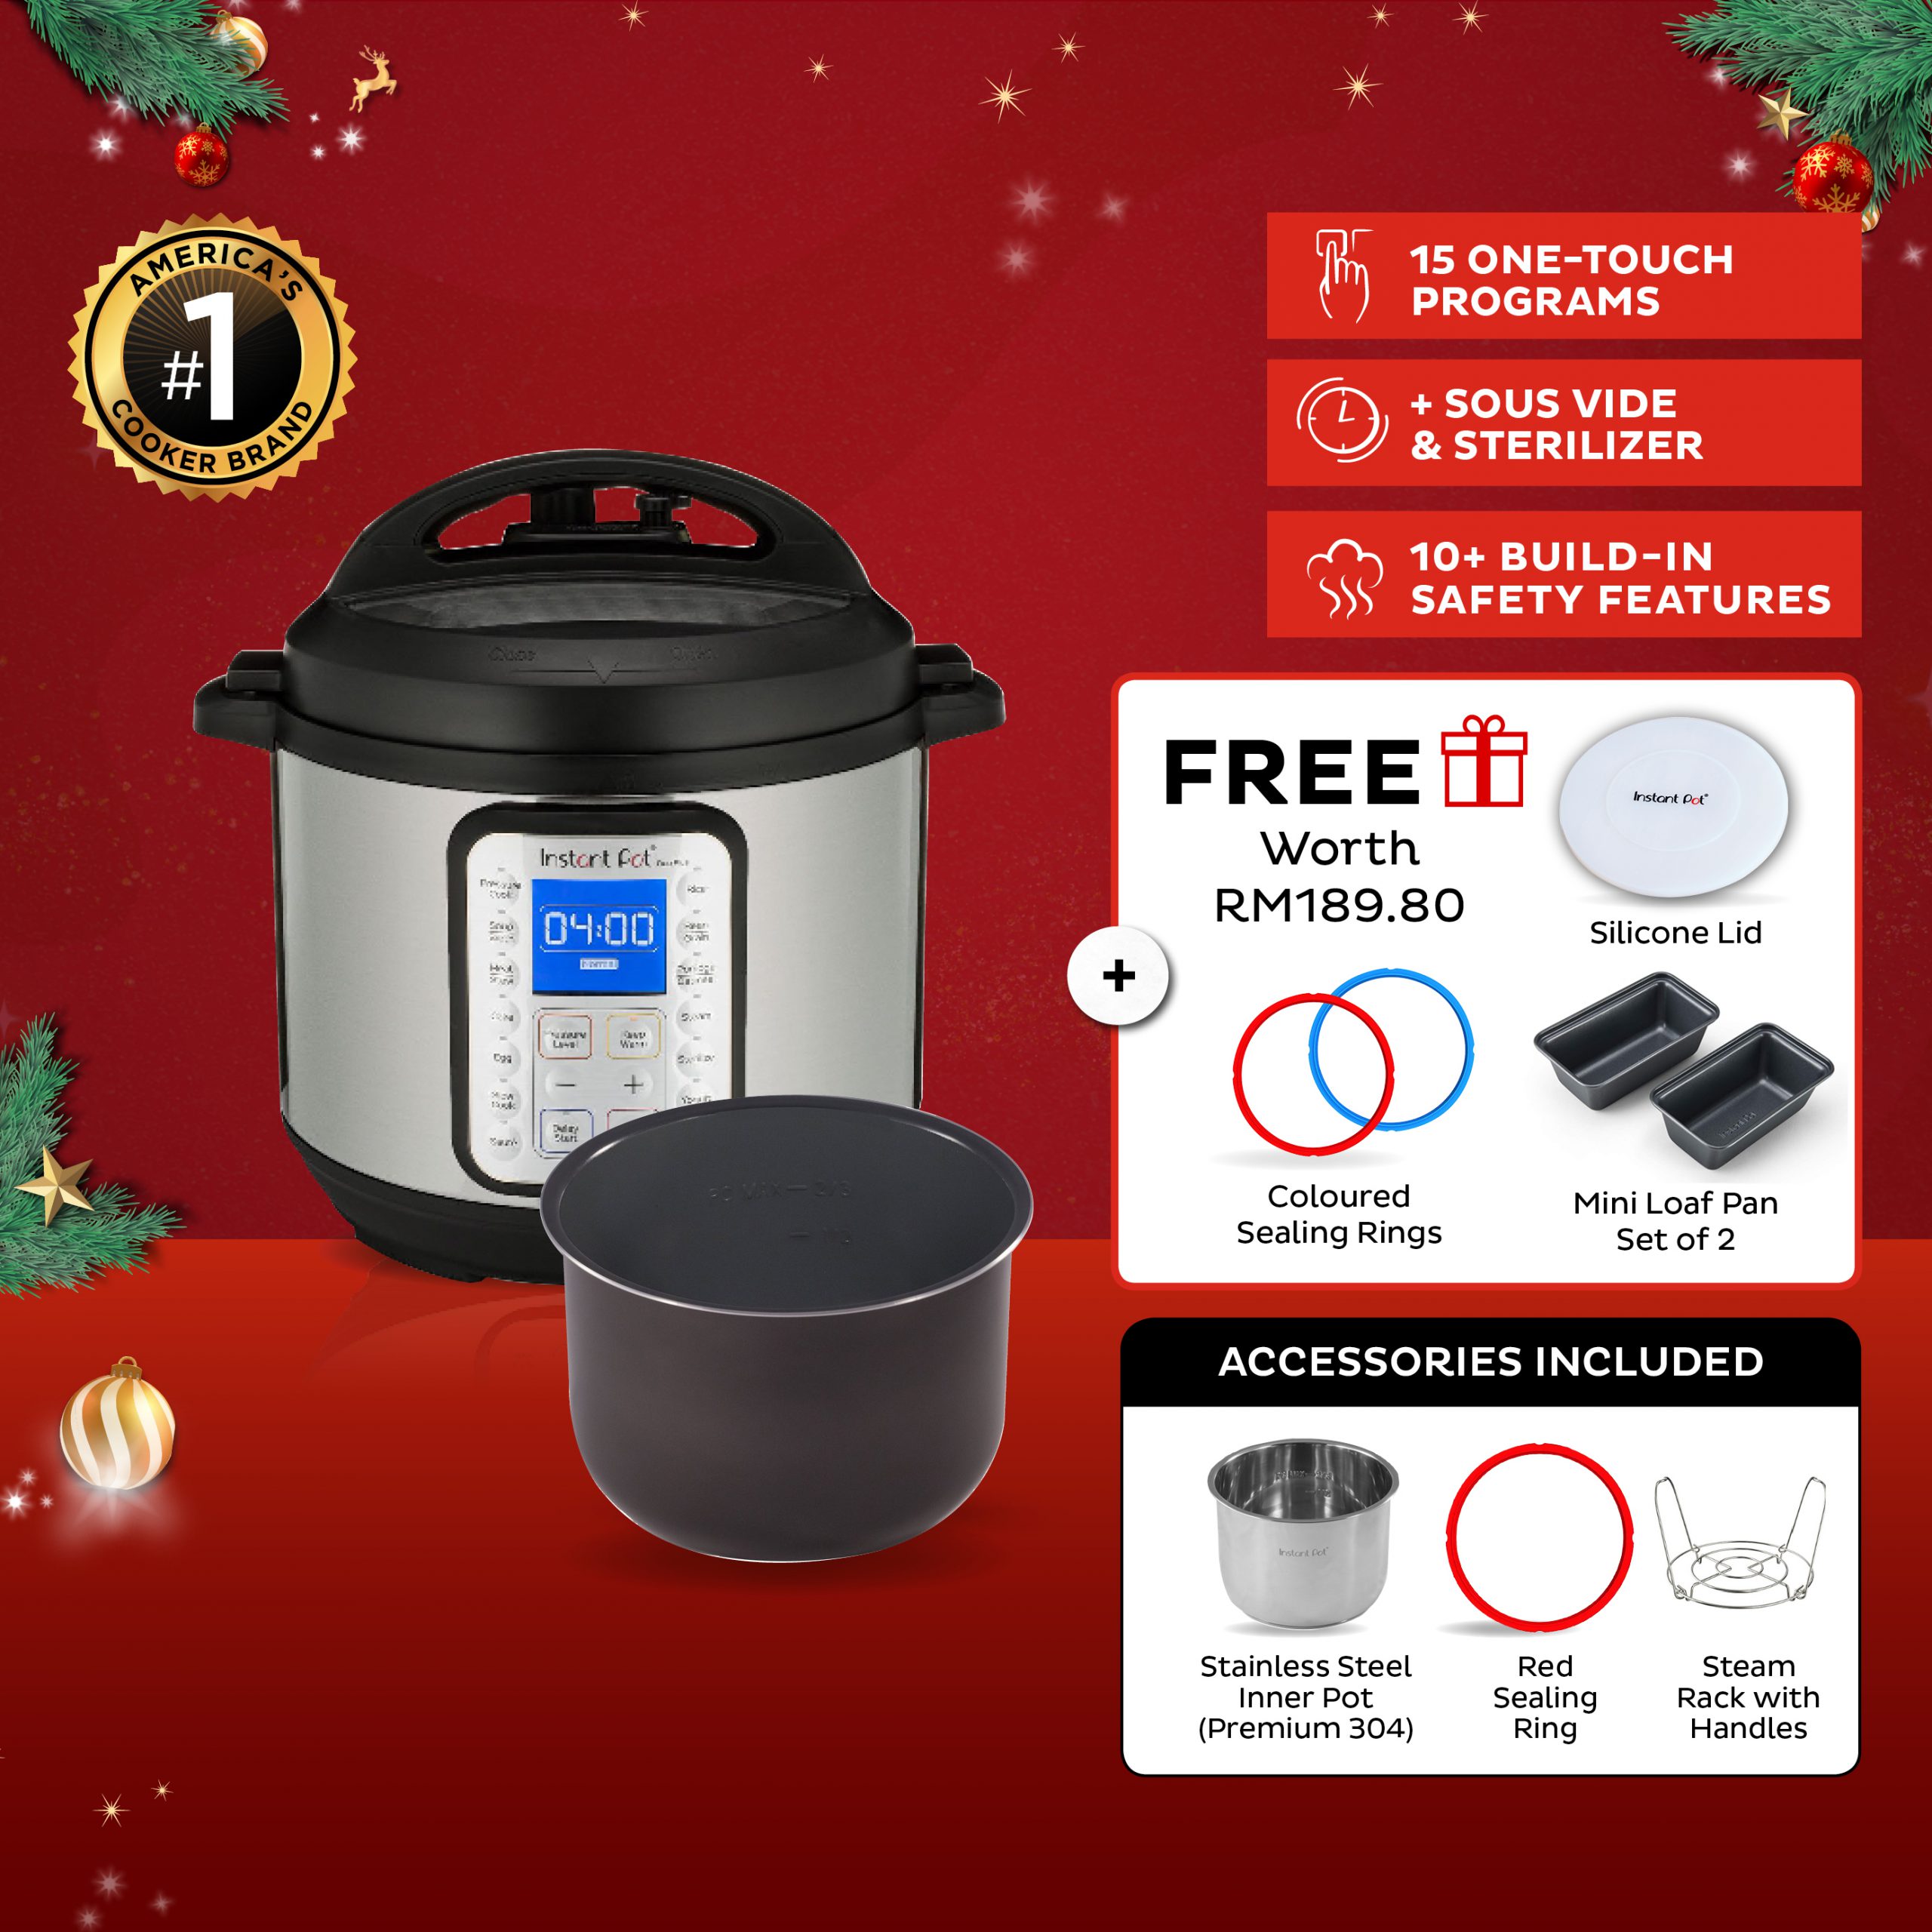 https://instantpotmy.com/wp-content/uploads/2021/05/IPMY_WS_Christmas-Sale_Duo-PLUSSPCP_PDP_20231107-scaled.jpg